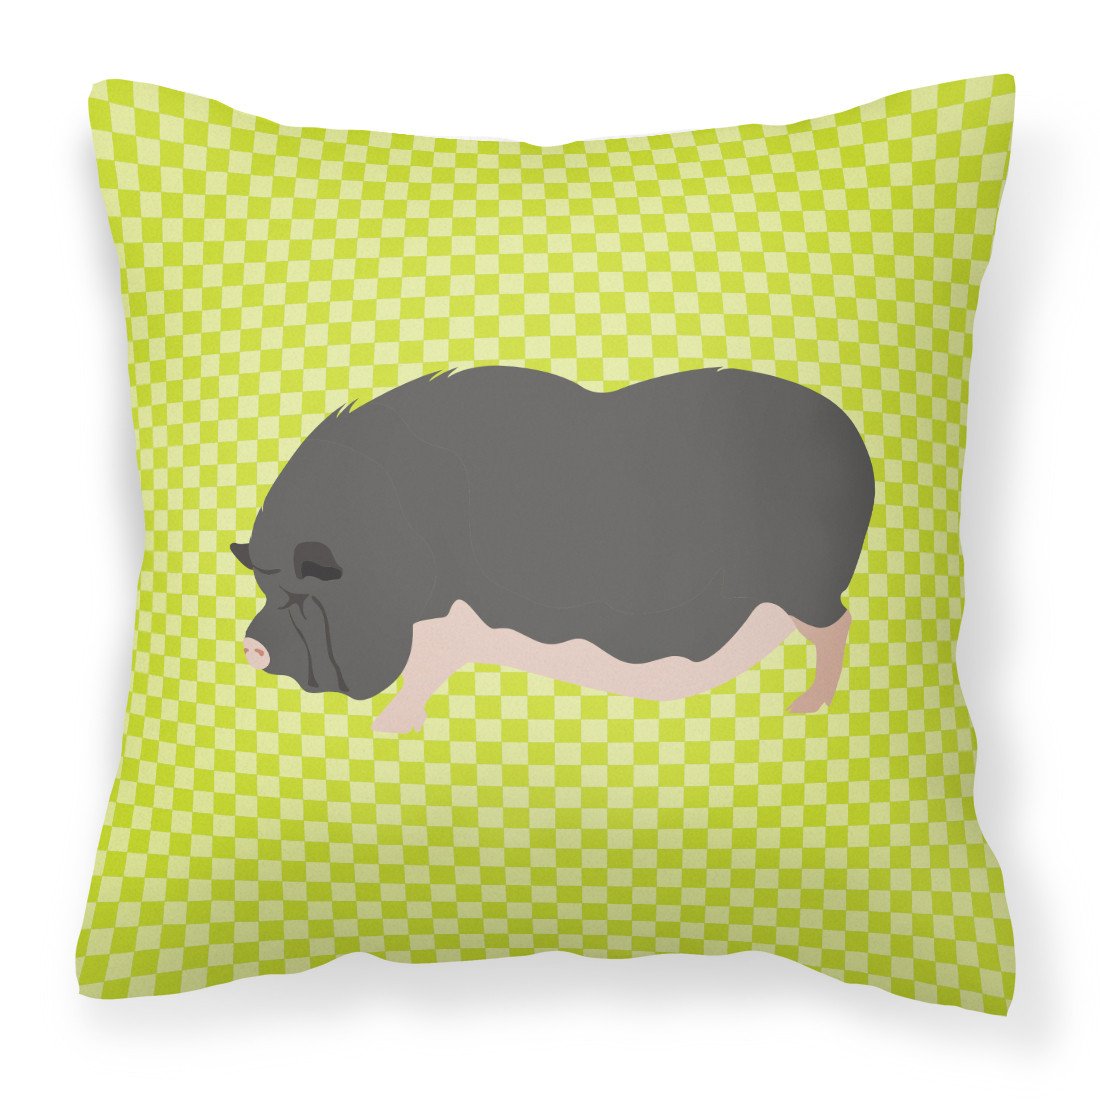 Vietnamese Pot-Bellied Pig Green Fabric Decorative Pillow BB7767PW1818 by Caroline's Treasures